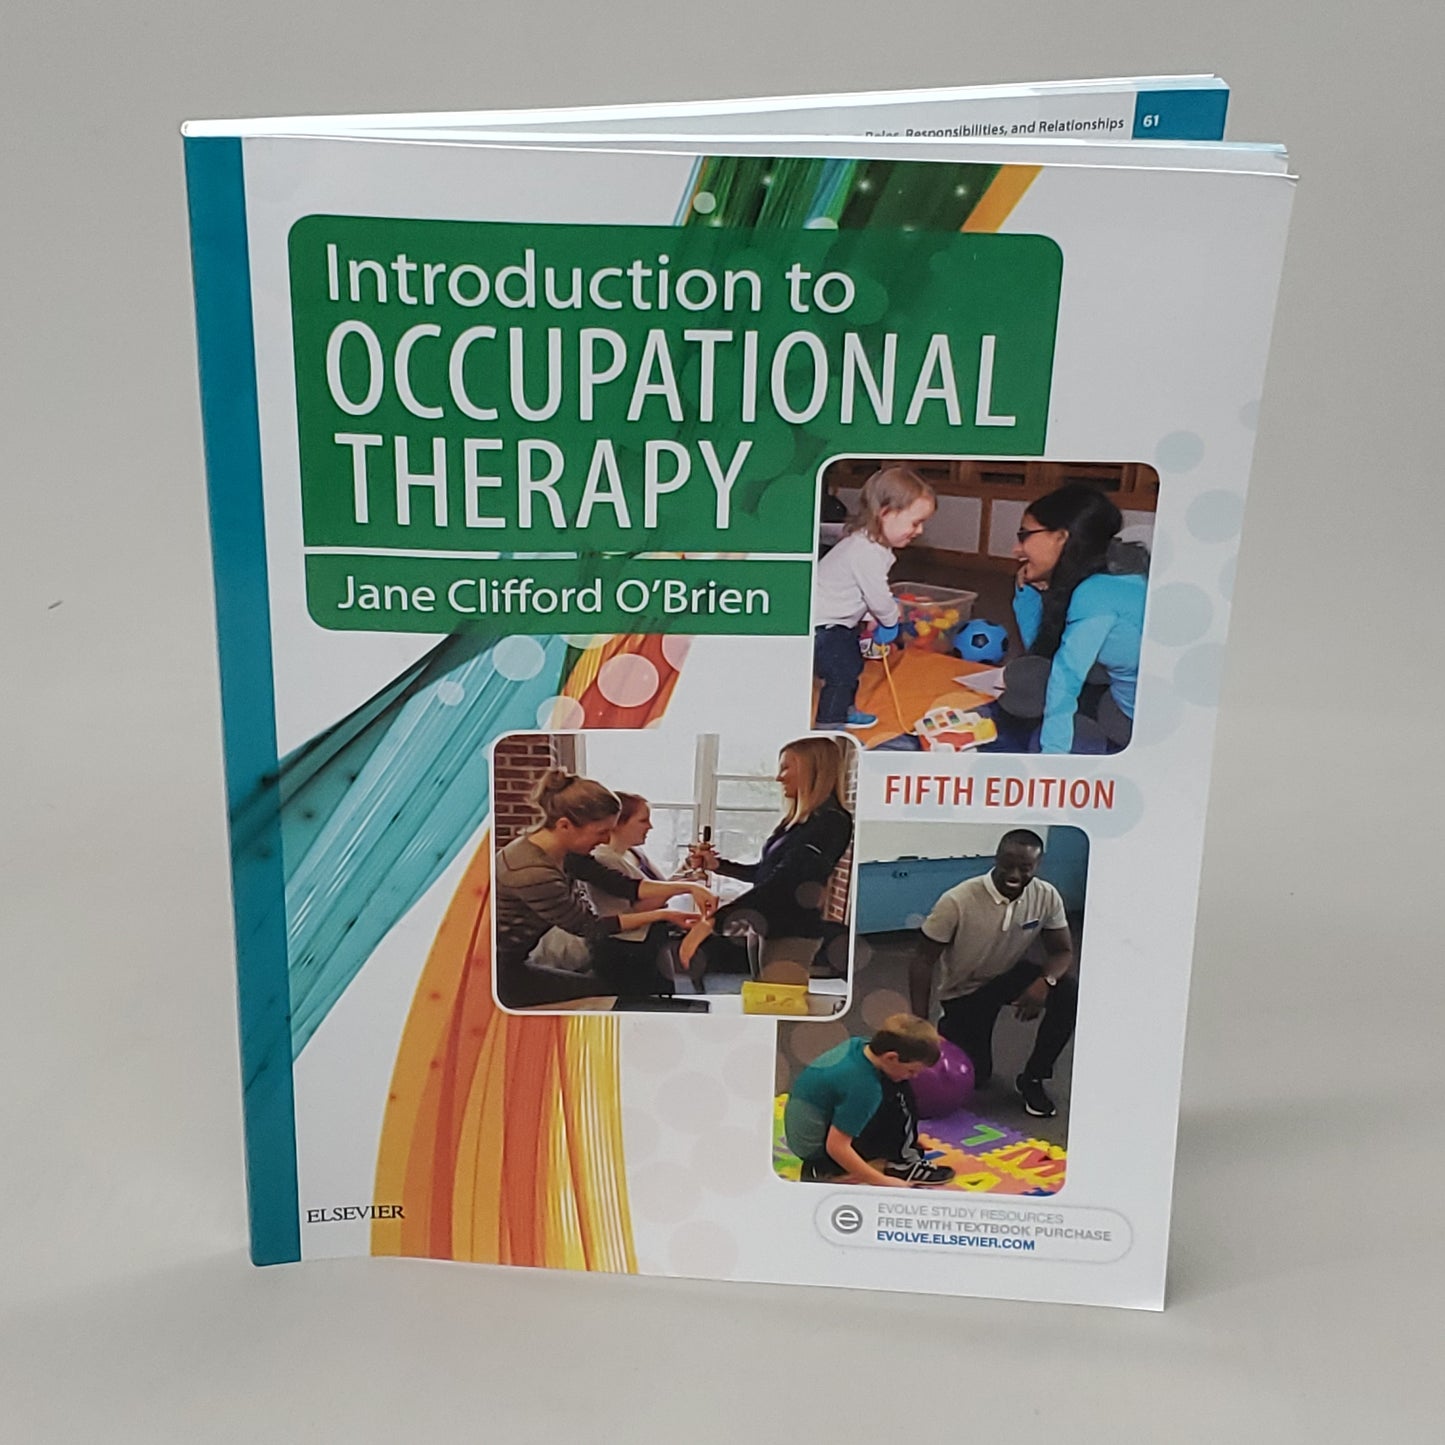 ELSEVIER Introduction to Occupational Therapy 5th Edition by Jane Clifford O'Brien Textbook (New)